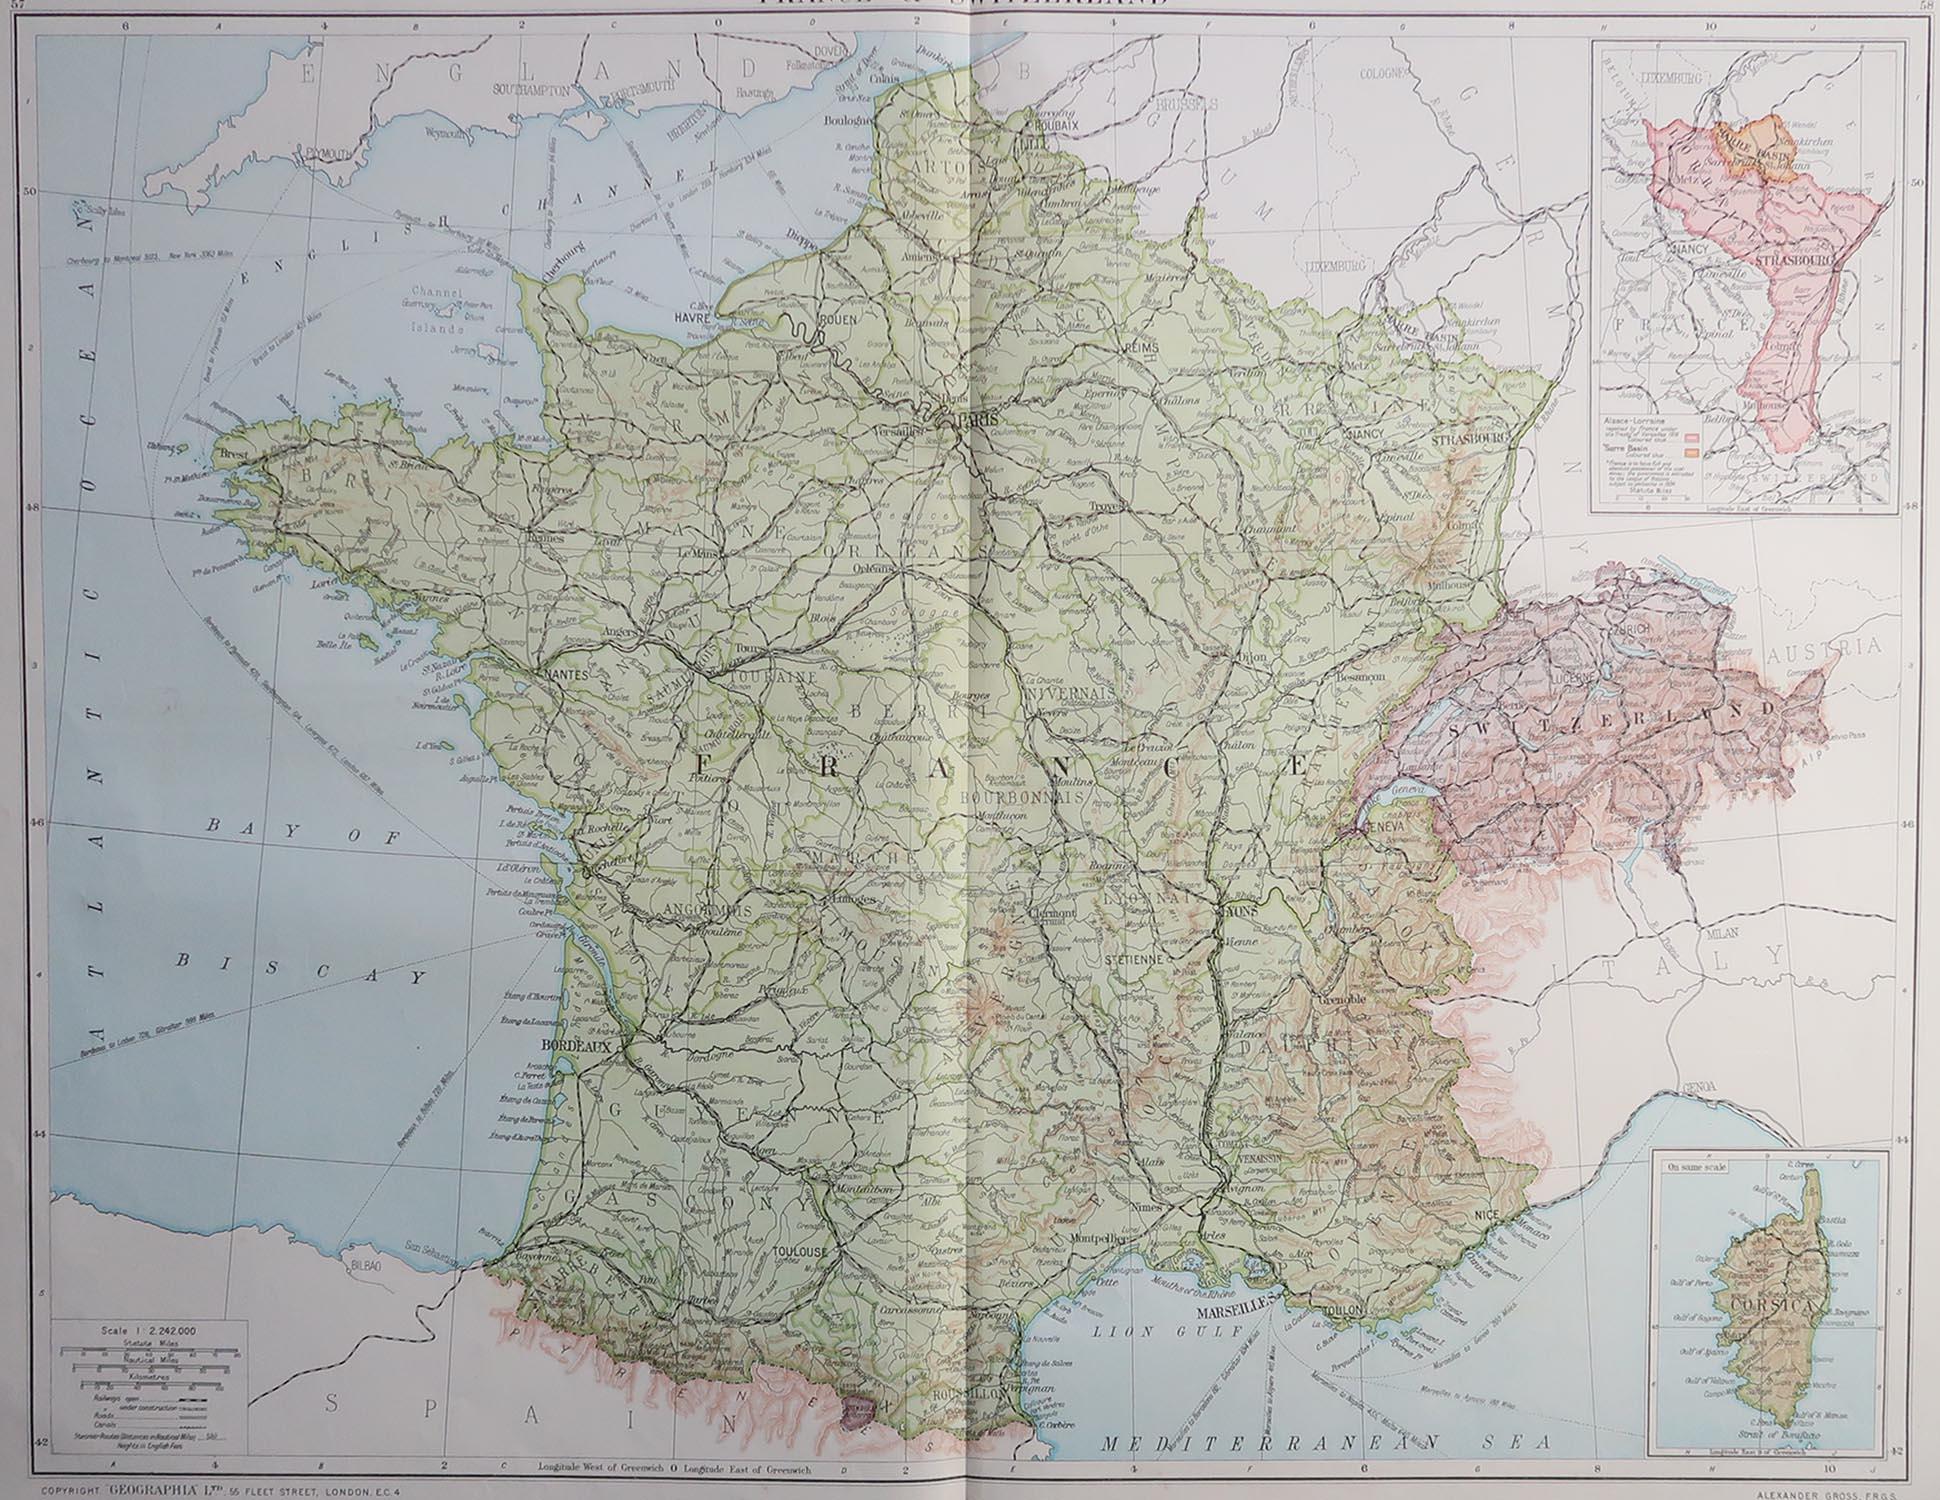 Great map of France

Original color.

Good condition 

Published by Alexander Gross

Unframed.








